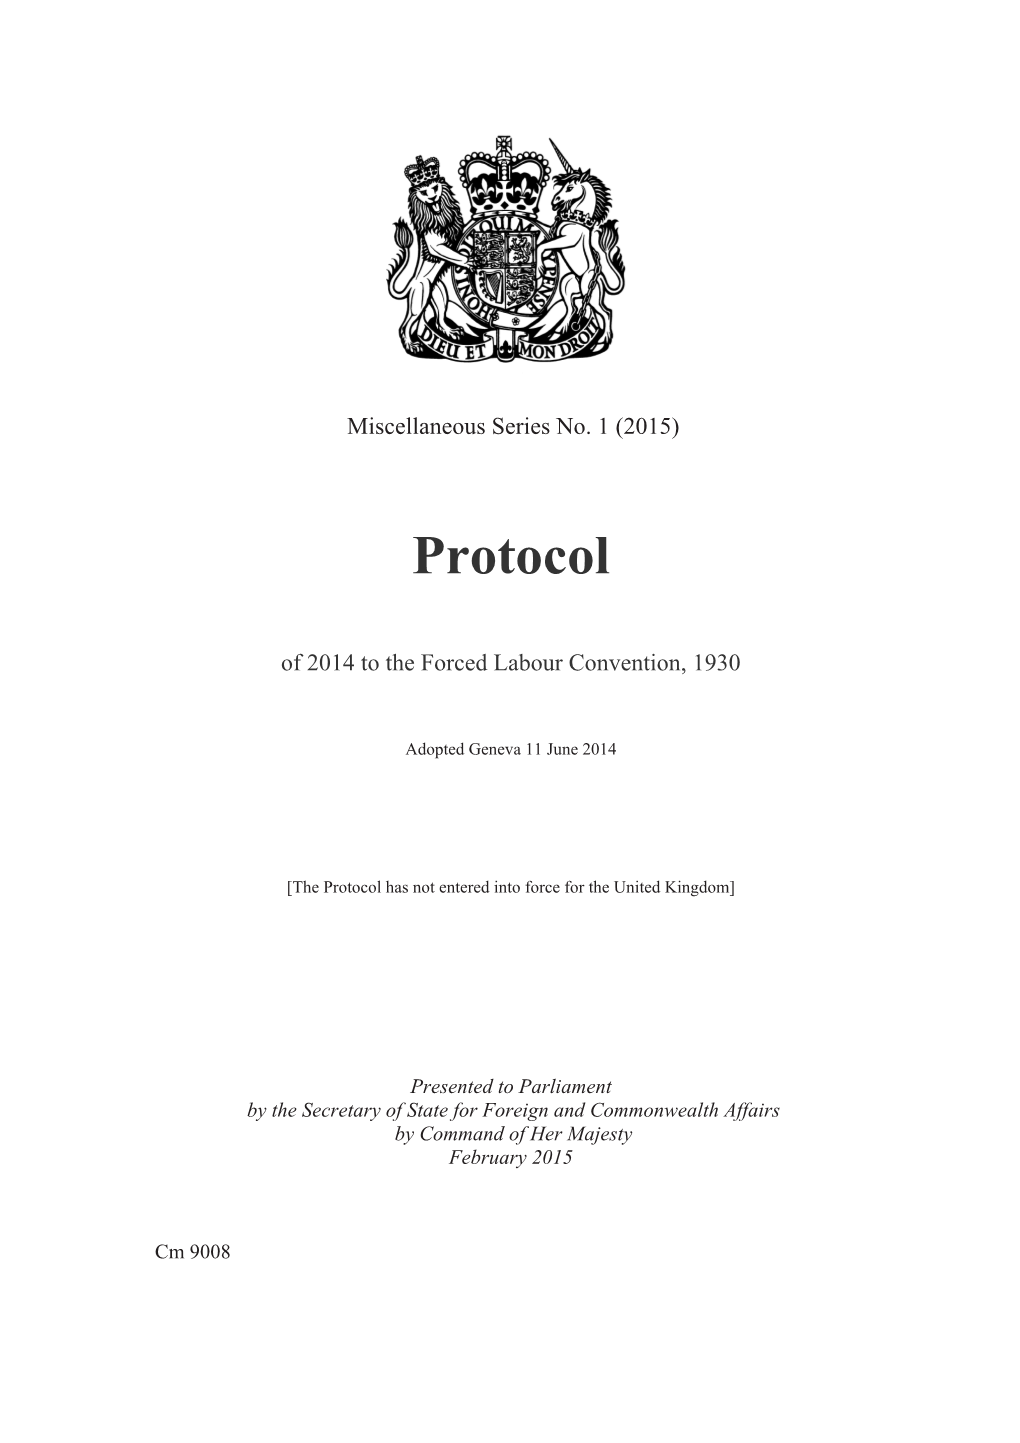 Protocol of 2014 to the Forced Labour Convention, 1930